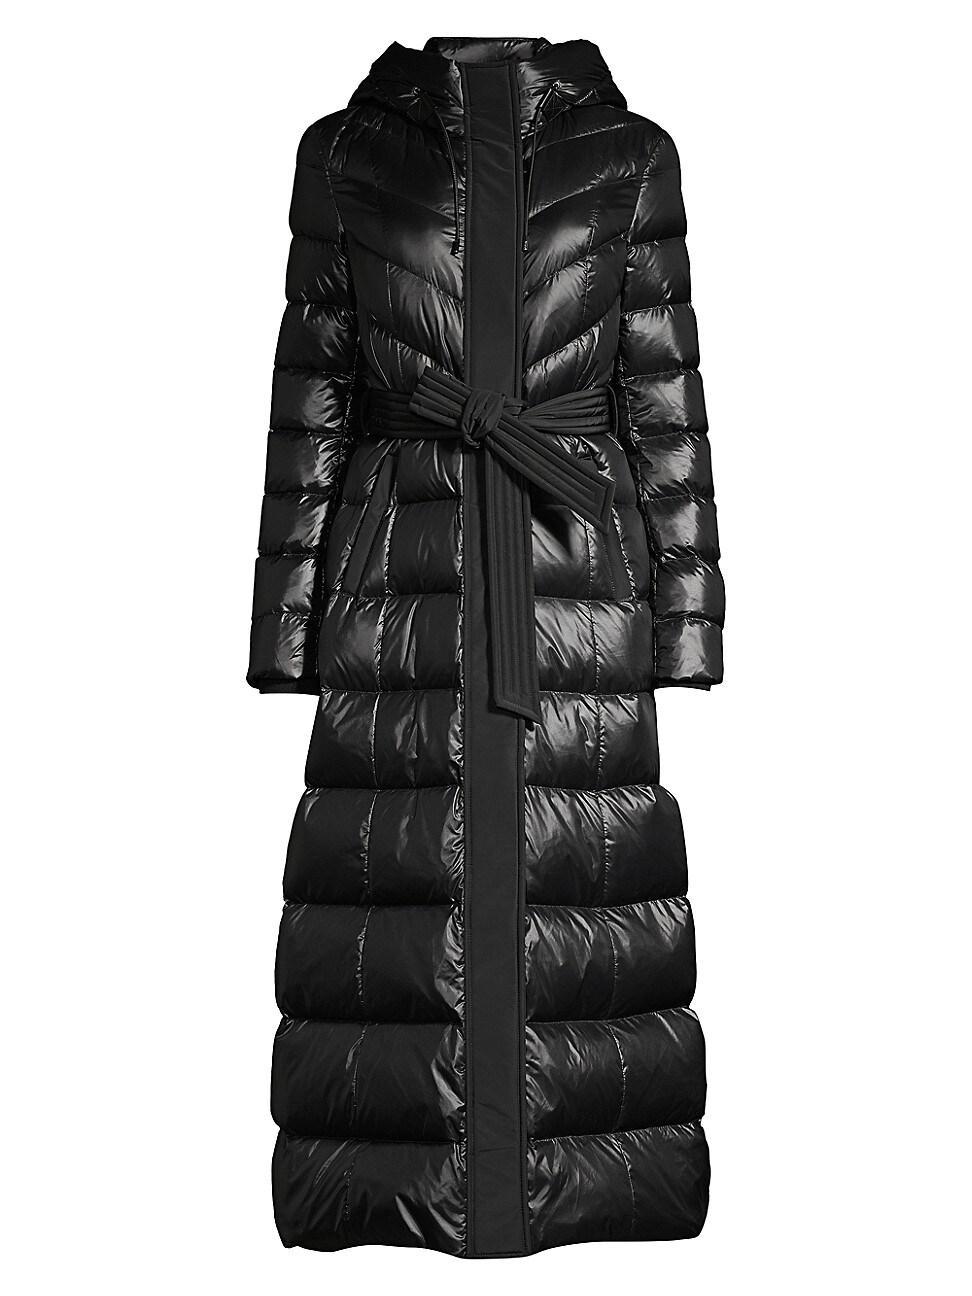 Mackage Calina Lustrous Water Repellent Down Coat Product Image